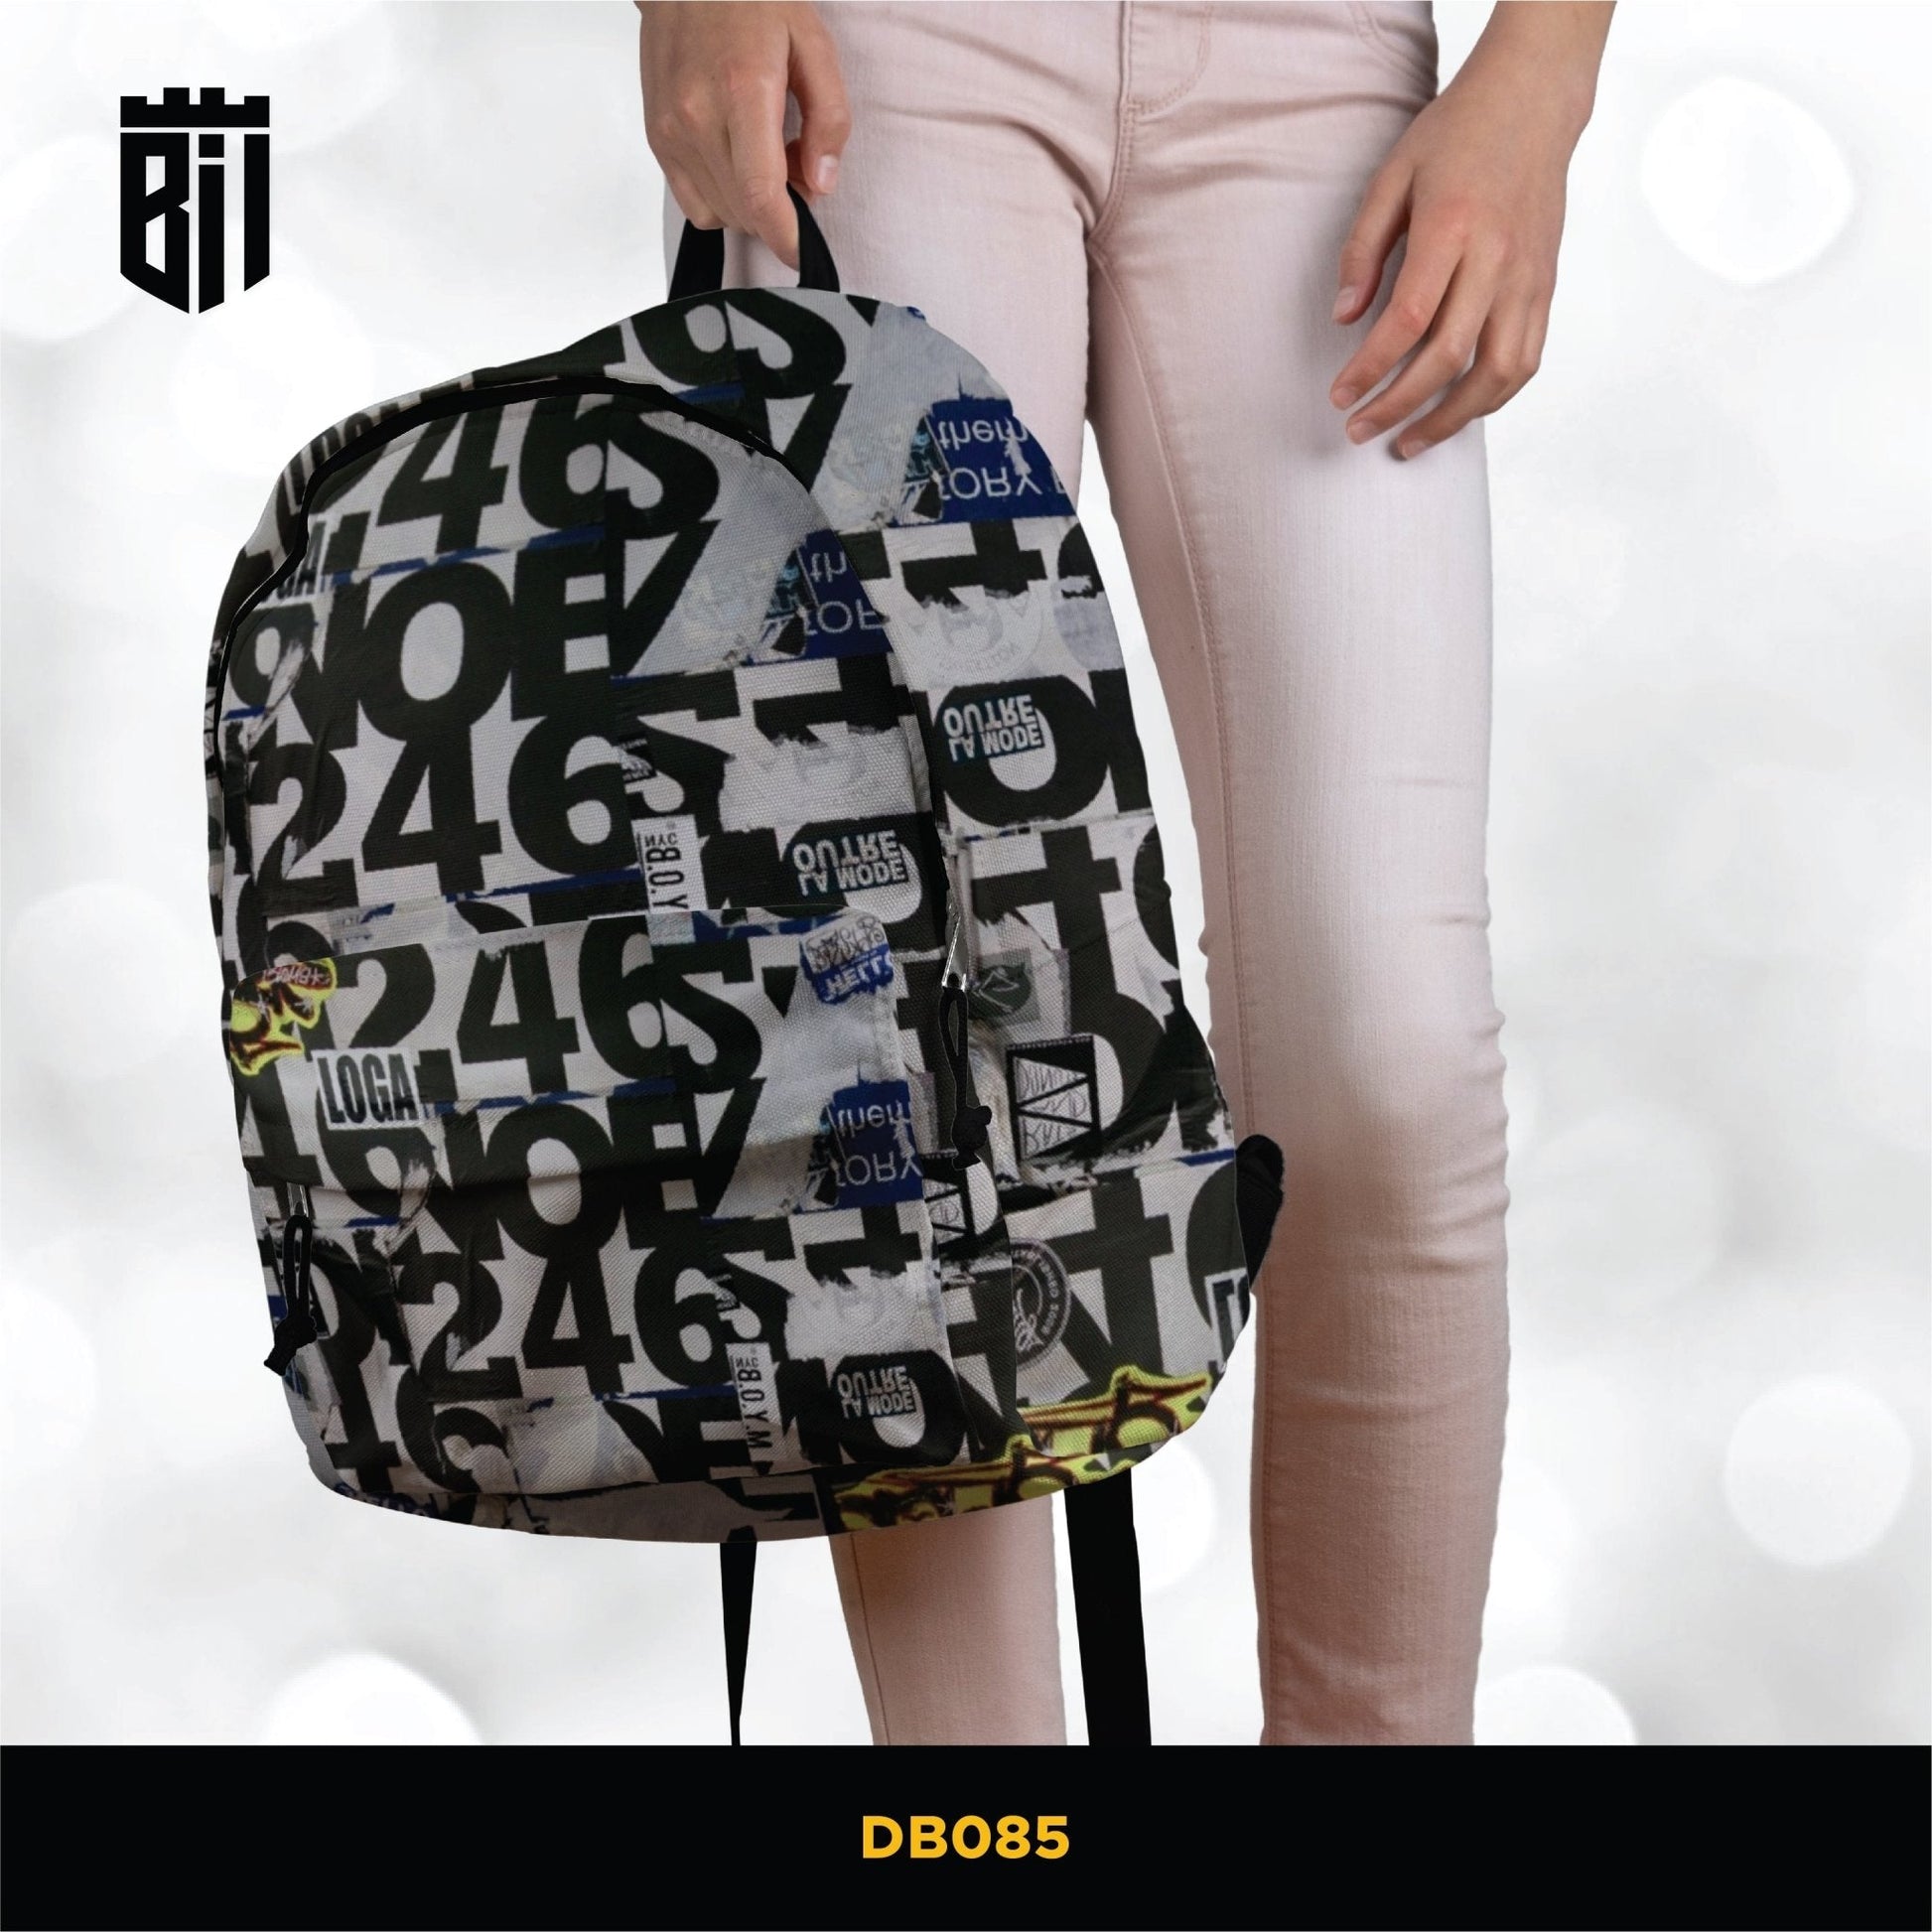 DB085 Typography Art Allover Printed Backpack - BREACHIT